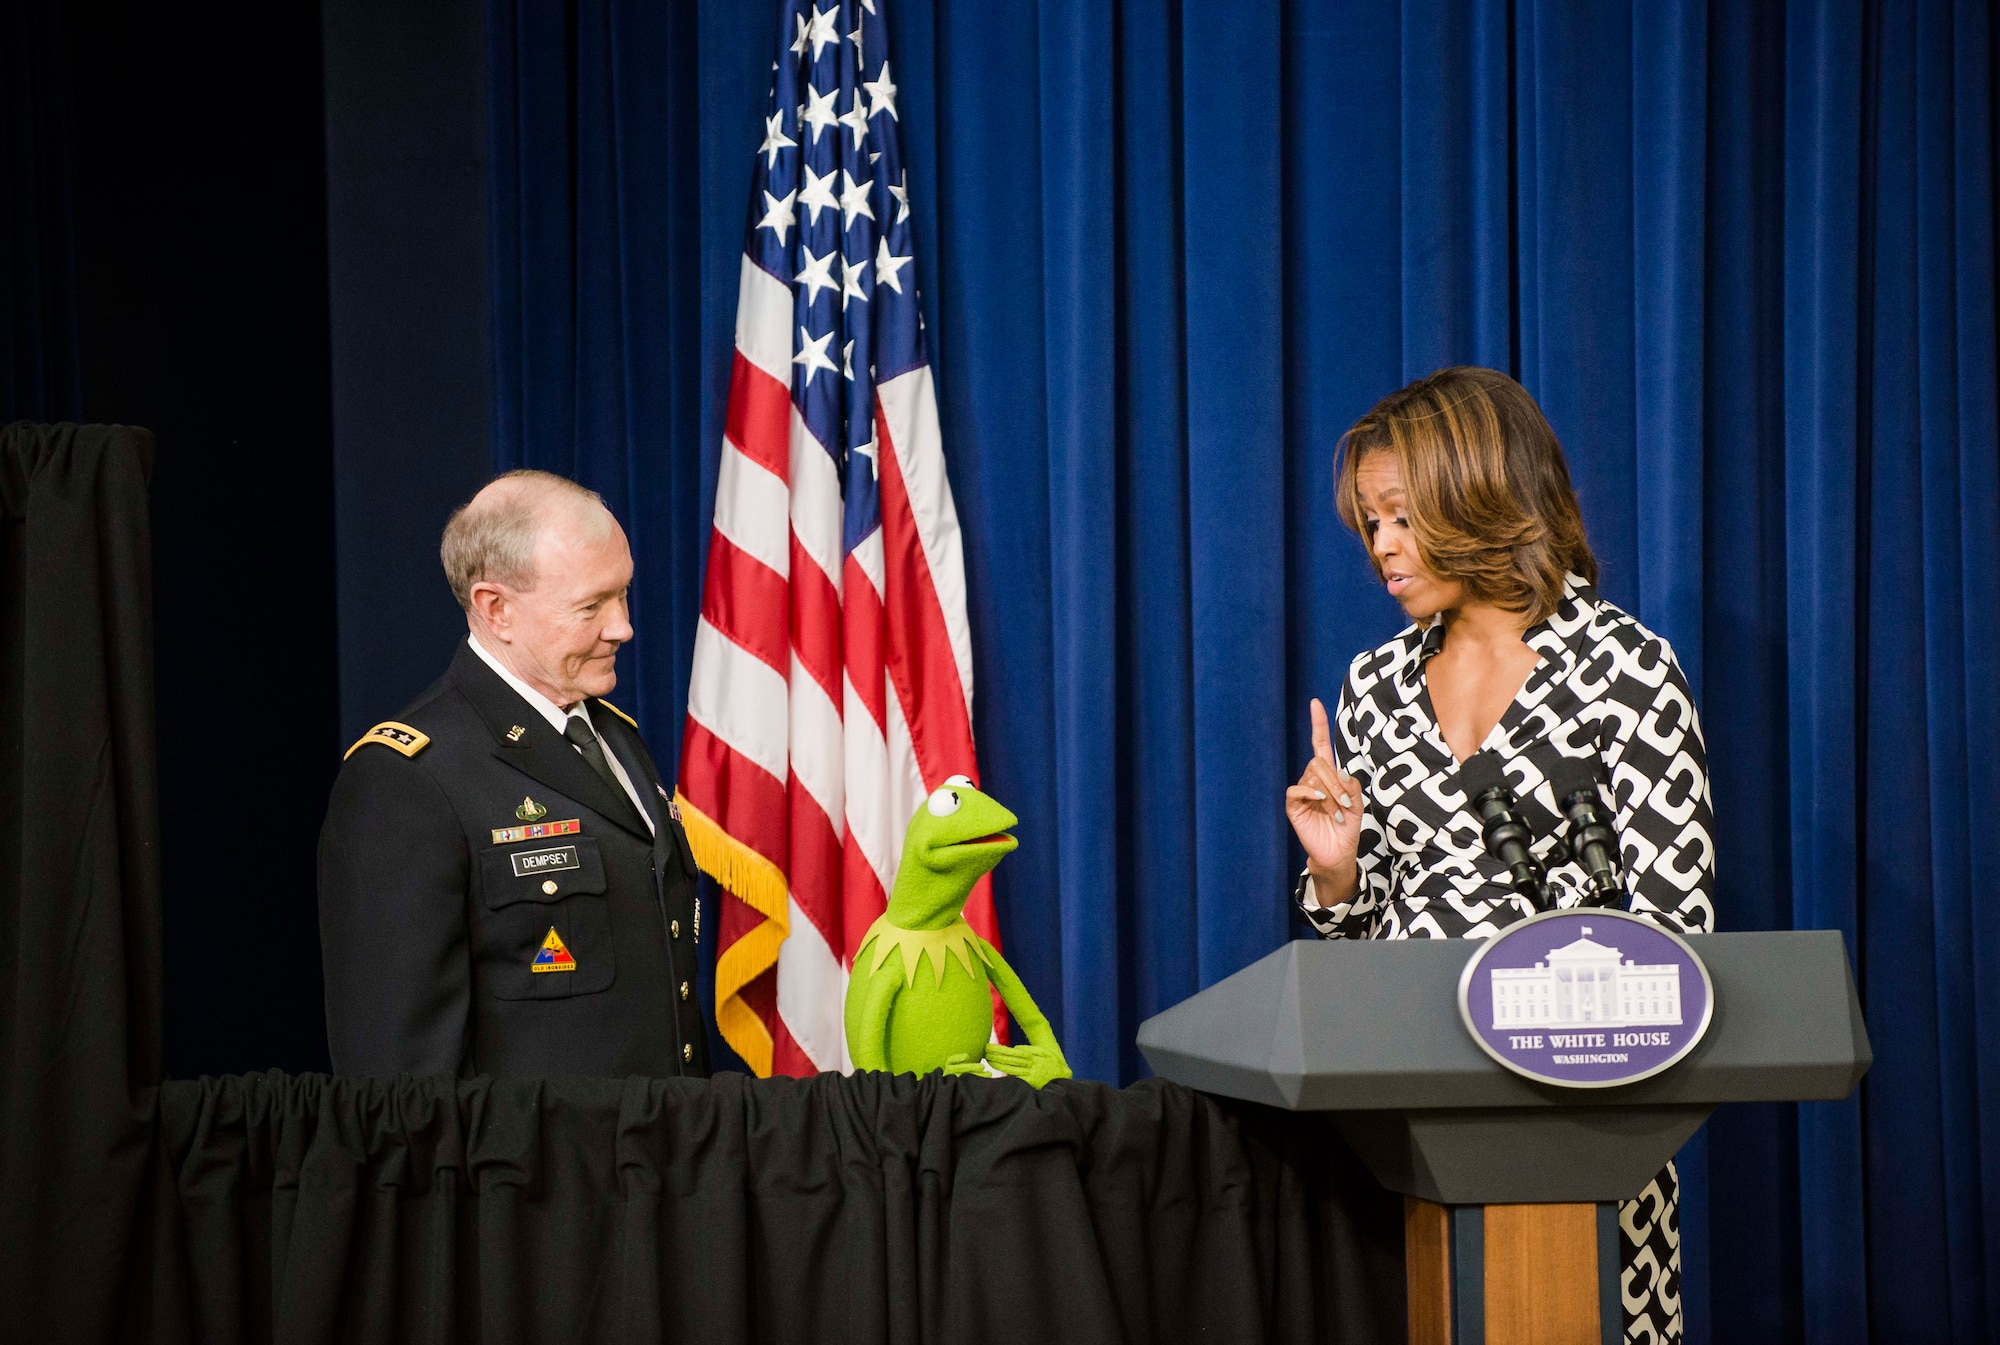 Army Gen. Martin E. Dempsey, the Chairman of the Joint Chiefs of Staff, joins First Lady Michelle Obama and Kermit the Frog in welcoming military families to a screening of the new movie "Muppets Most Wanted" March 12, 2014, at the White House. The trio thanked military families for their service, strength and resilience. (DOD photo/Army Staff Sgt. Sean K. Harp)   